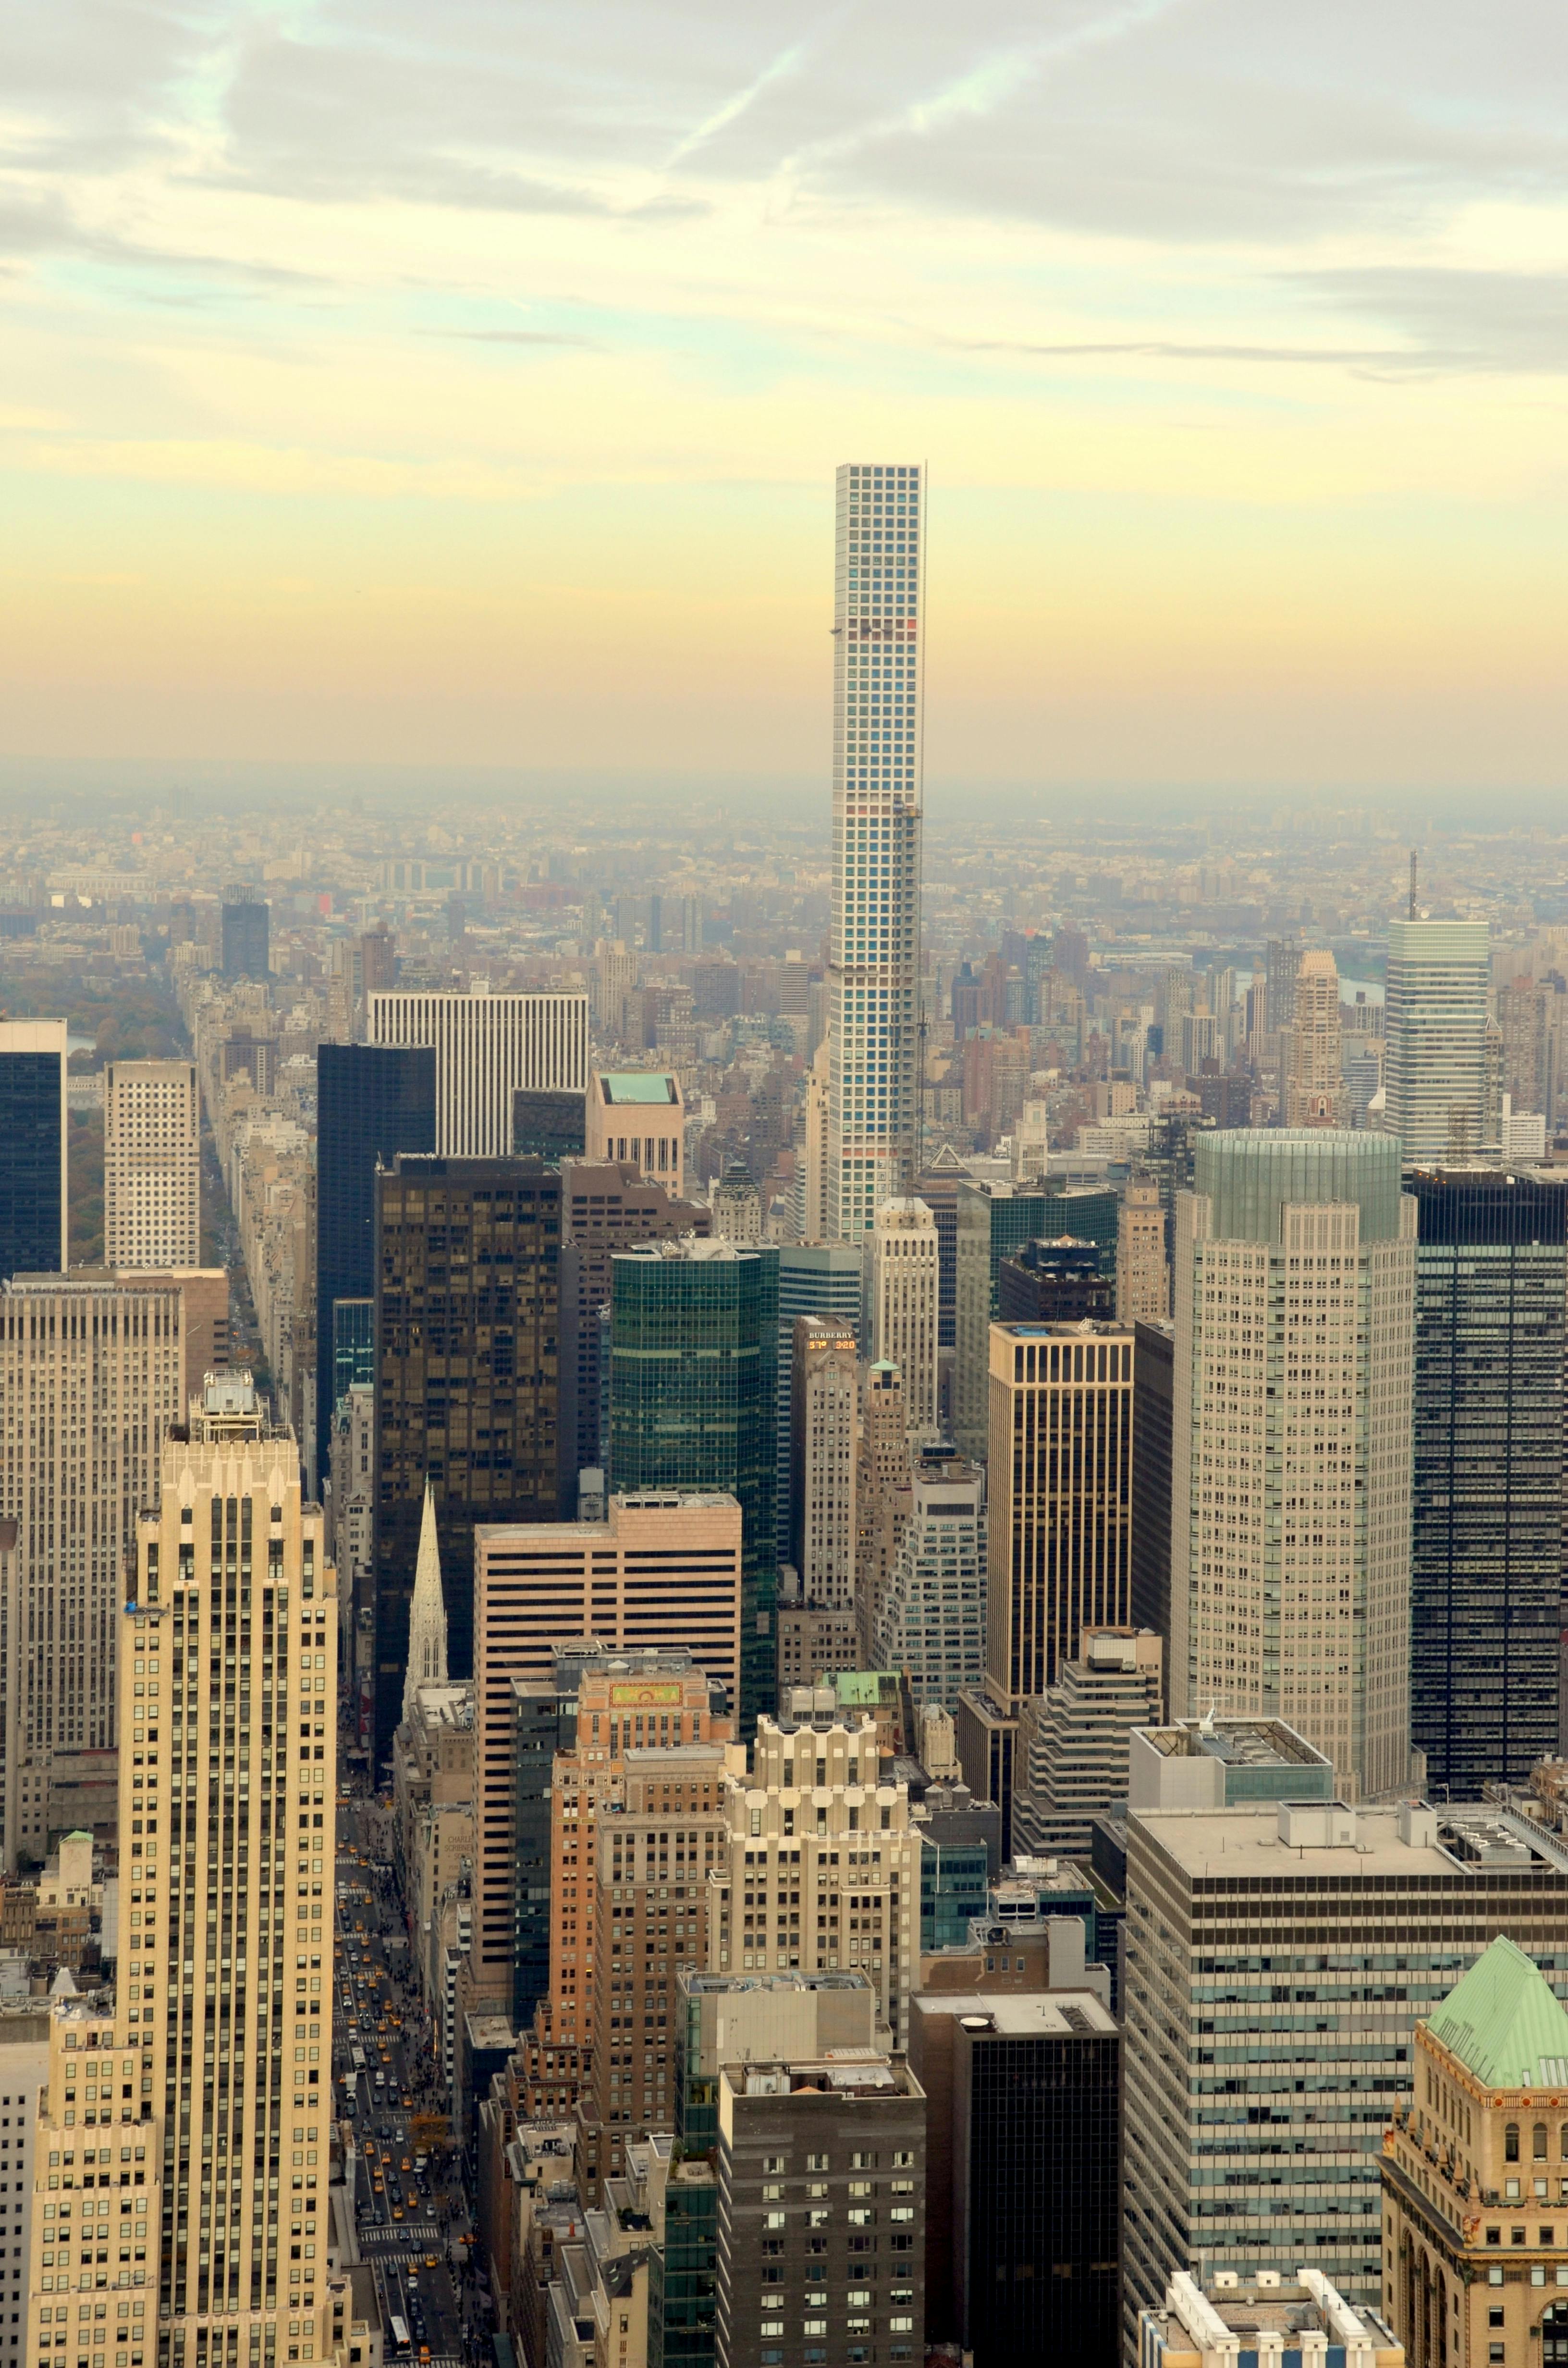 Free stock photo of buildings, empire state building, empire state building view